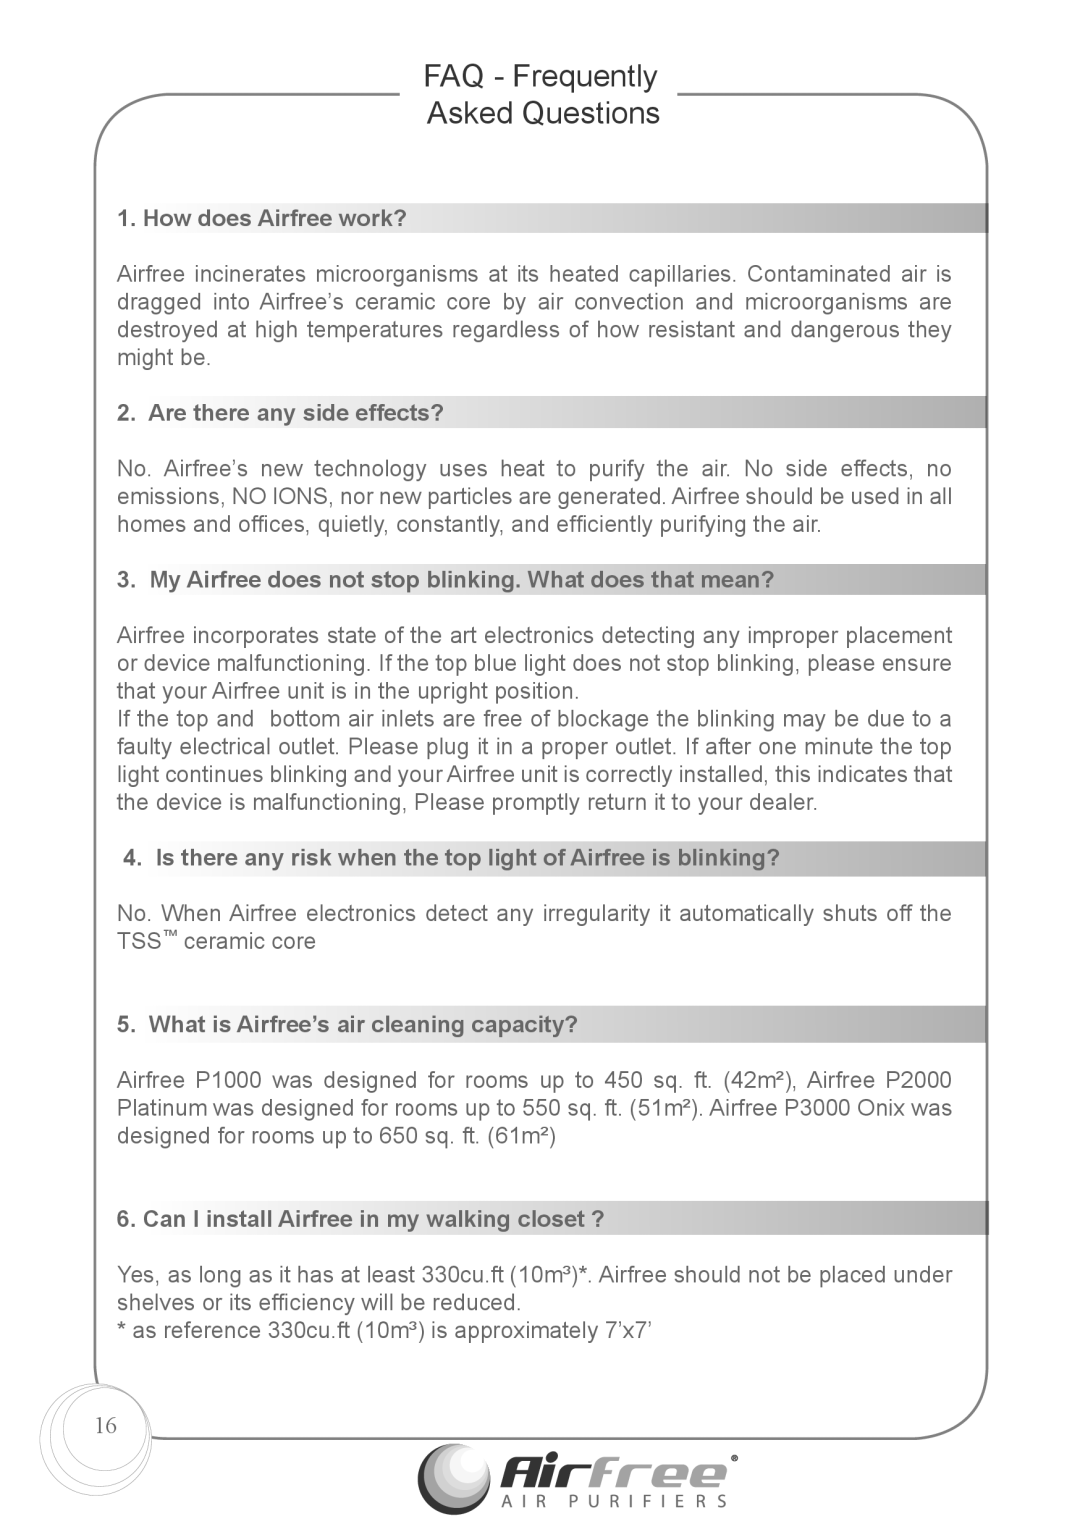 Airfree p1000 instruction manual FAQ - Frequently Asked Questions, How does Airfree work?, Are there any side effects? 